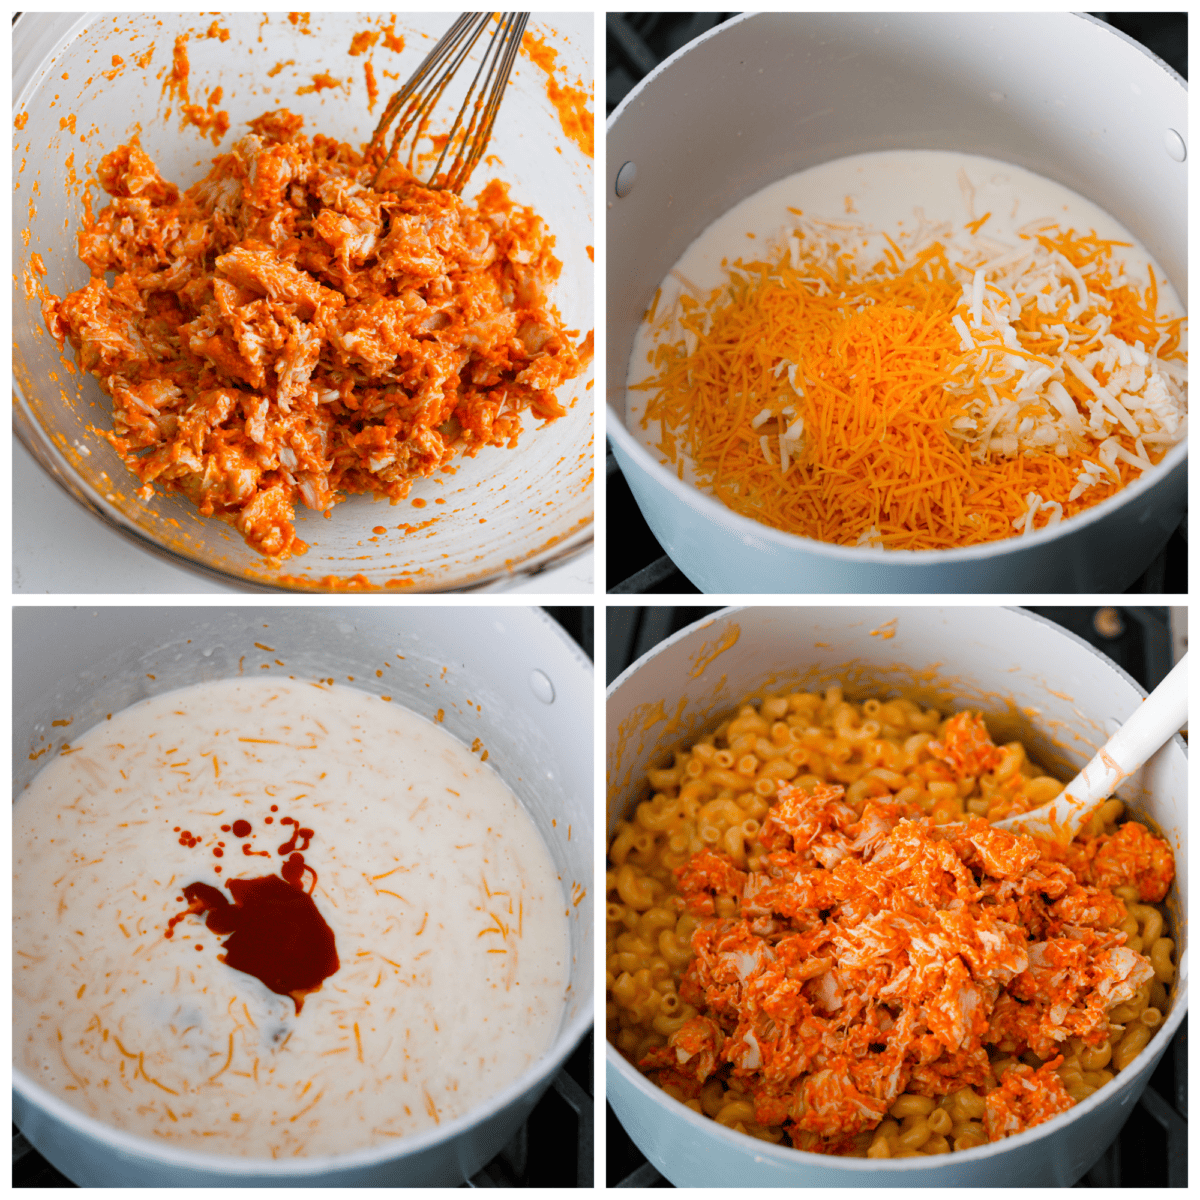 First photo of chicken coated in buffalo sauce. Second photo of cheese and milk added to the pot. Third photo of hot sauce added to the pot. Fourth photo of buffalo chicken added to the pot of macaroni and cheese.